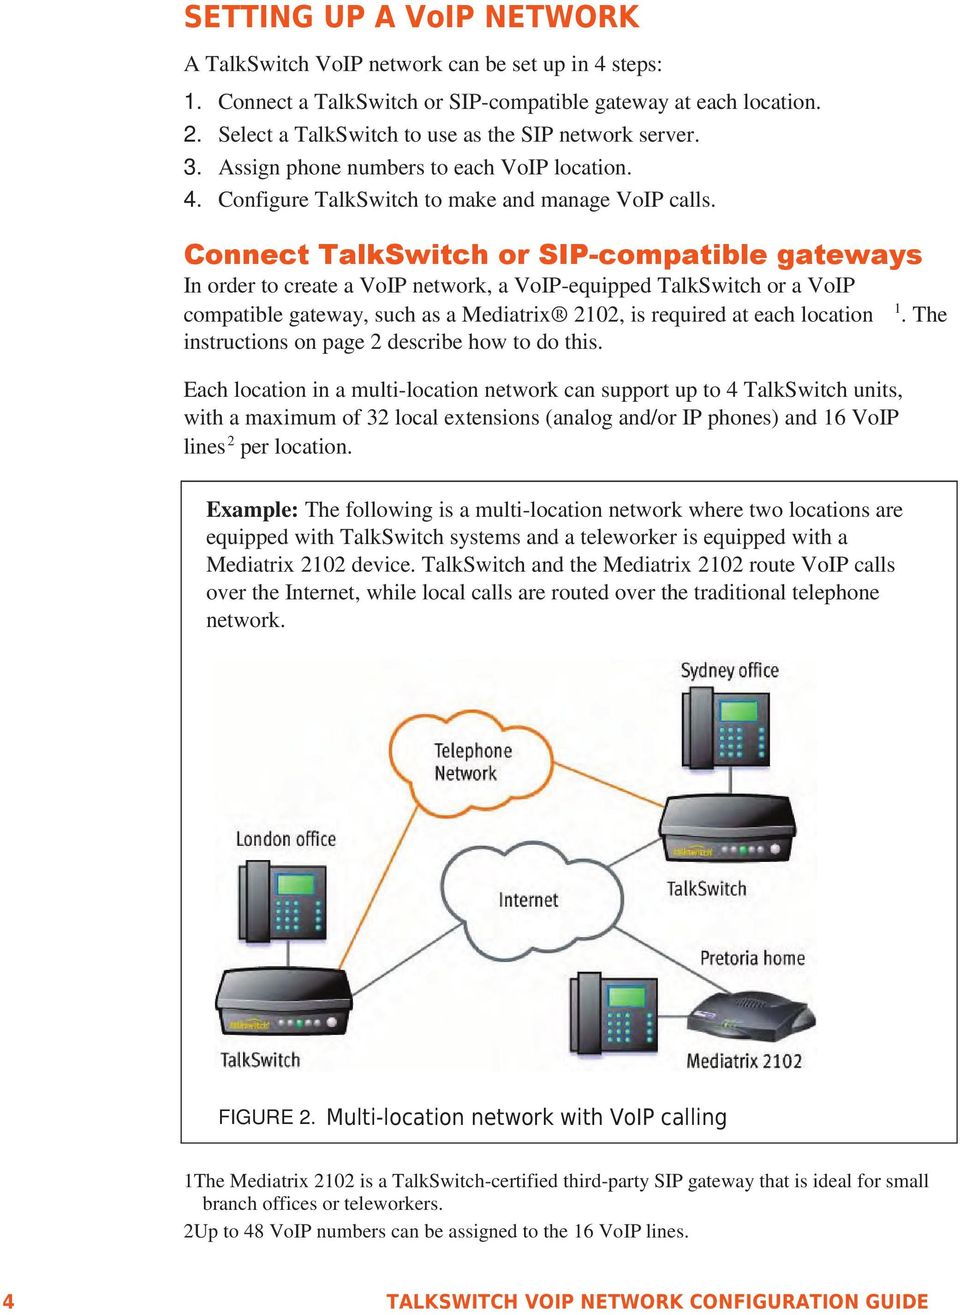 Connect TalkSwitch or SIP-compatible gateways In order to create a VoIP network, a VoIP-equipped TalkSwitch or a VoIP compatible gateway, such as a Mediatrix 2102, is required at each location